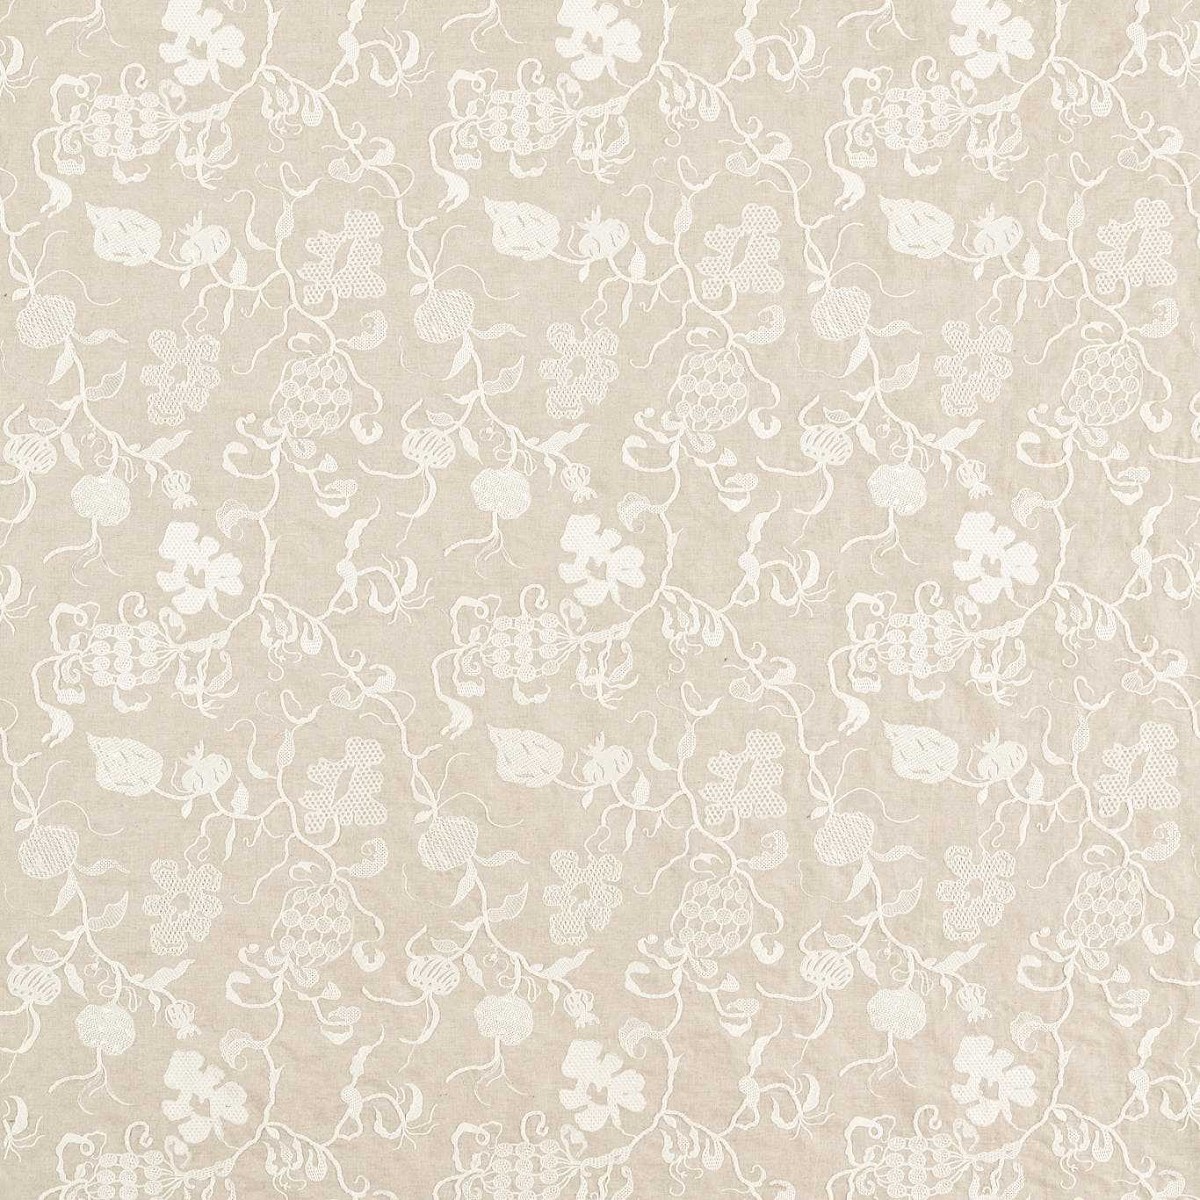 Mydsommer Pickings Linen/Chalk Fabric by Sanderson